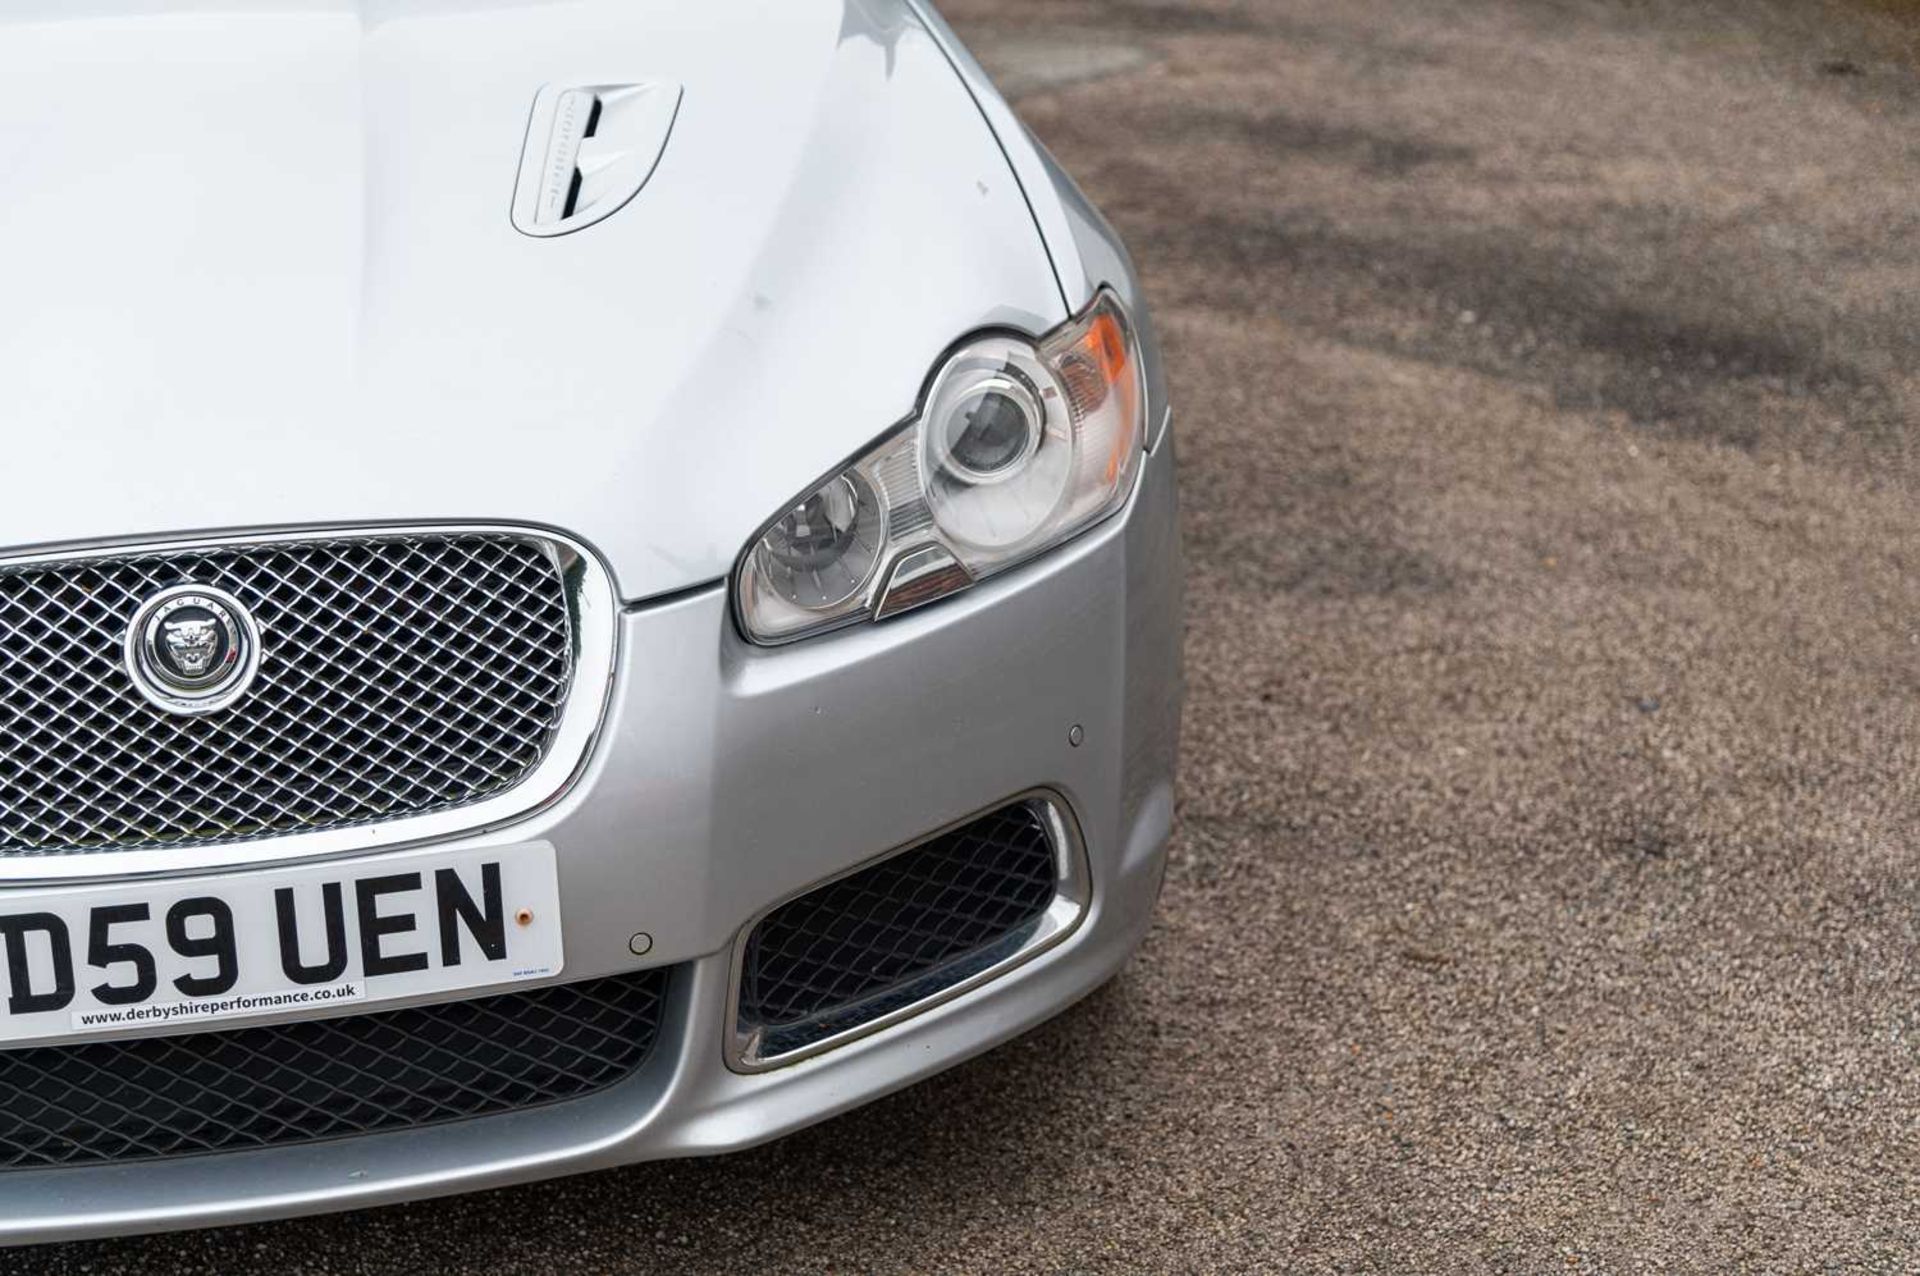 2009 Jaguar XFR Saloon 500 horsepower four-door super saloon, with full service history - Image 18 of 81